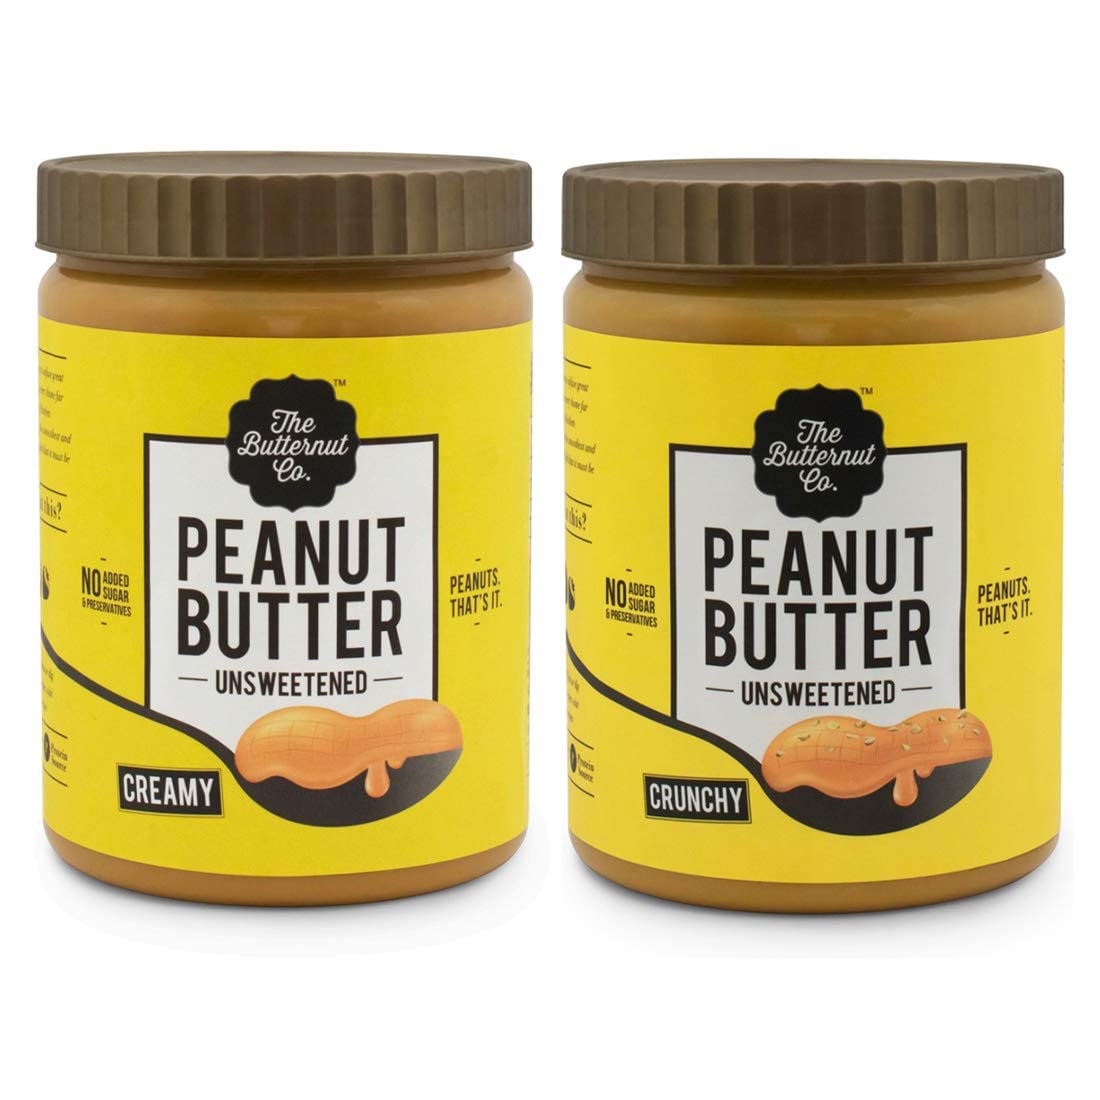 The Butternut Co. Crunchy & Creamy Unsweetened Peanut Butter Combo - 2 Kg Pack | High-Protein Nut Butter for Weight Gain, Pre & Post Workout | Healthy, Natural, Sugar-Free, 100% Pure Roasted Peanut